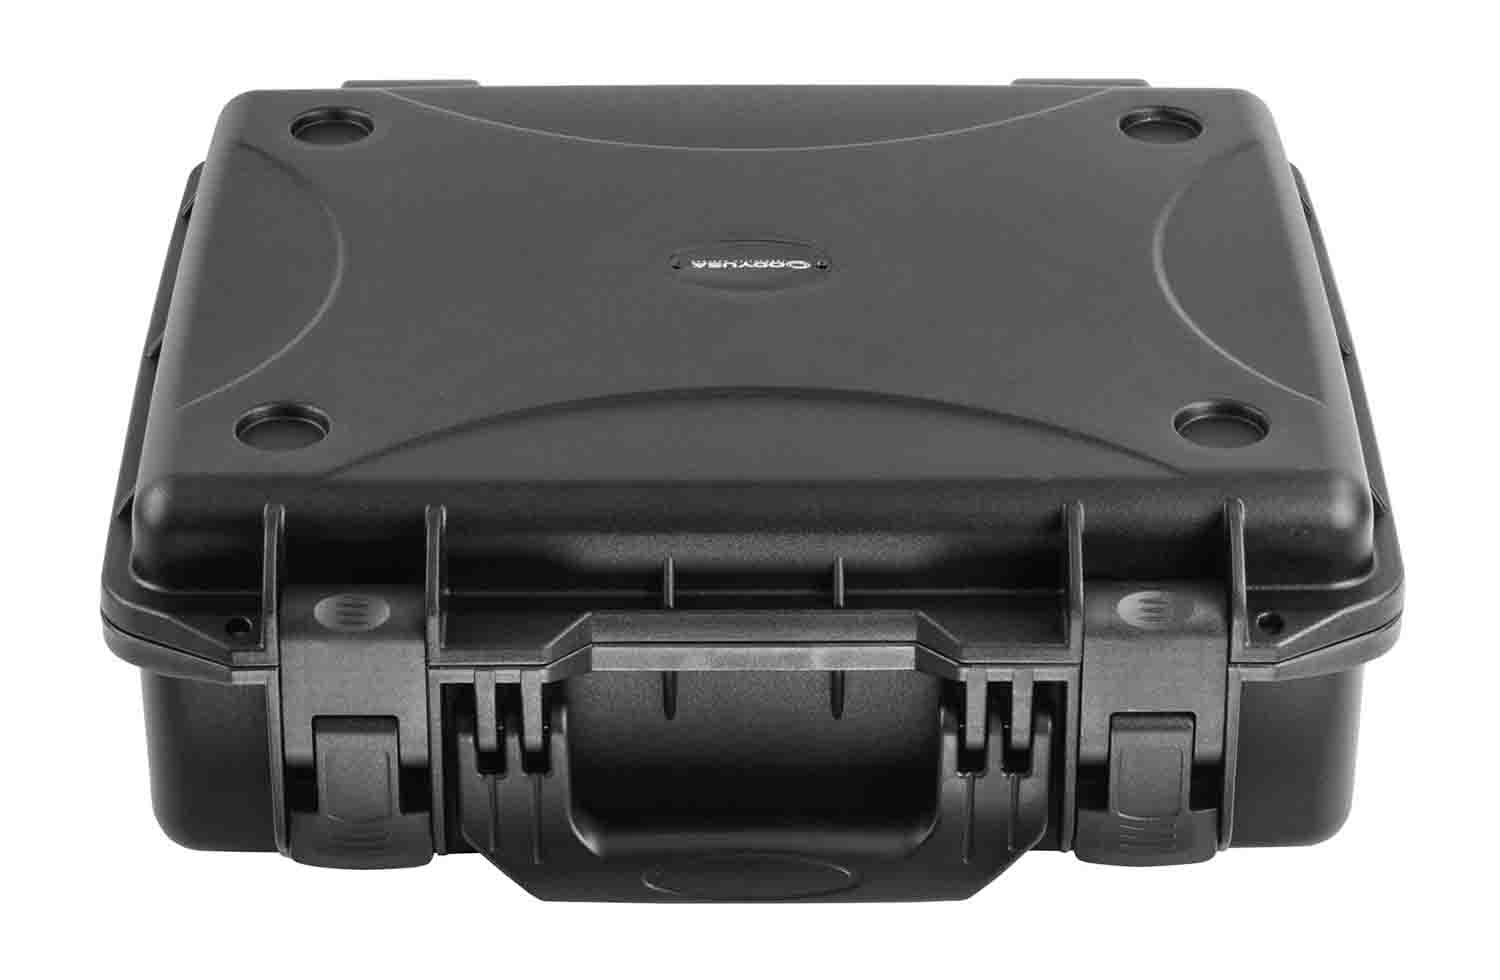 Odyssey VU161305 Vulcan Injection-Molded Utility Case with Pluck Foam - 17 x 13.25 x 3.75" Interior - Hollywood DJ